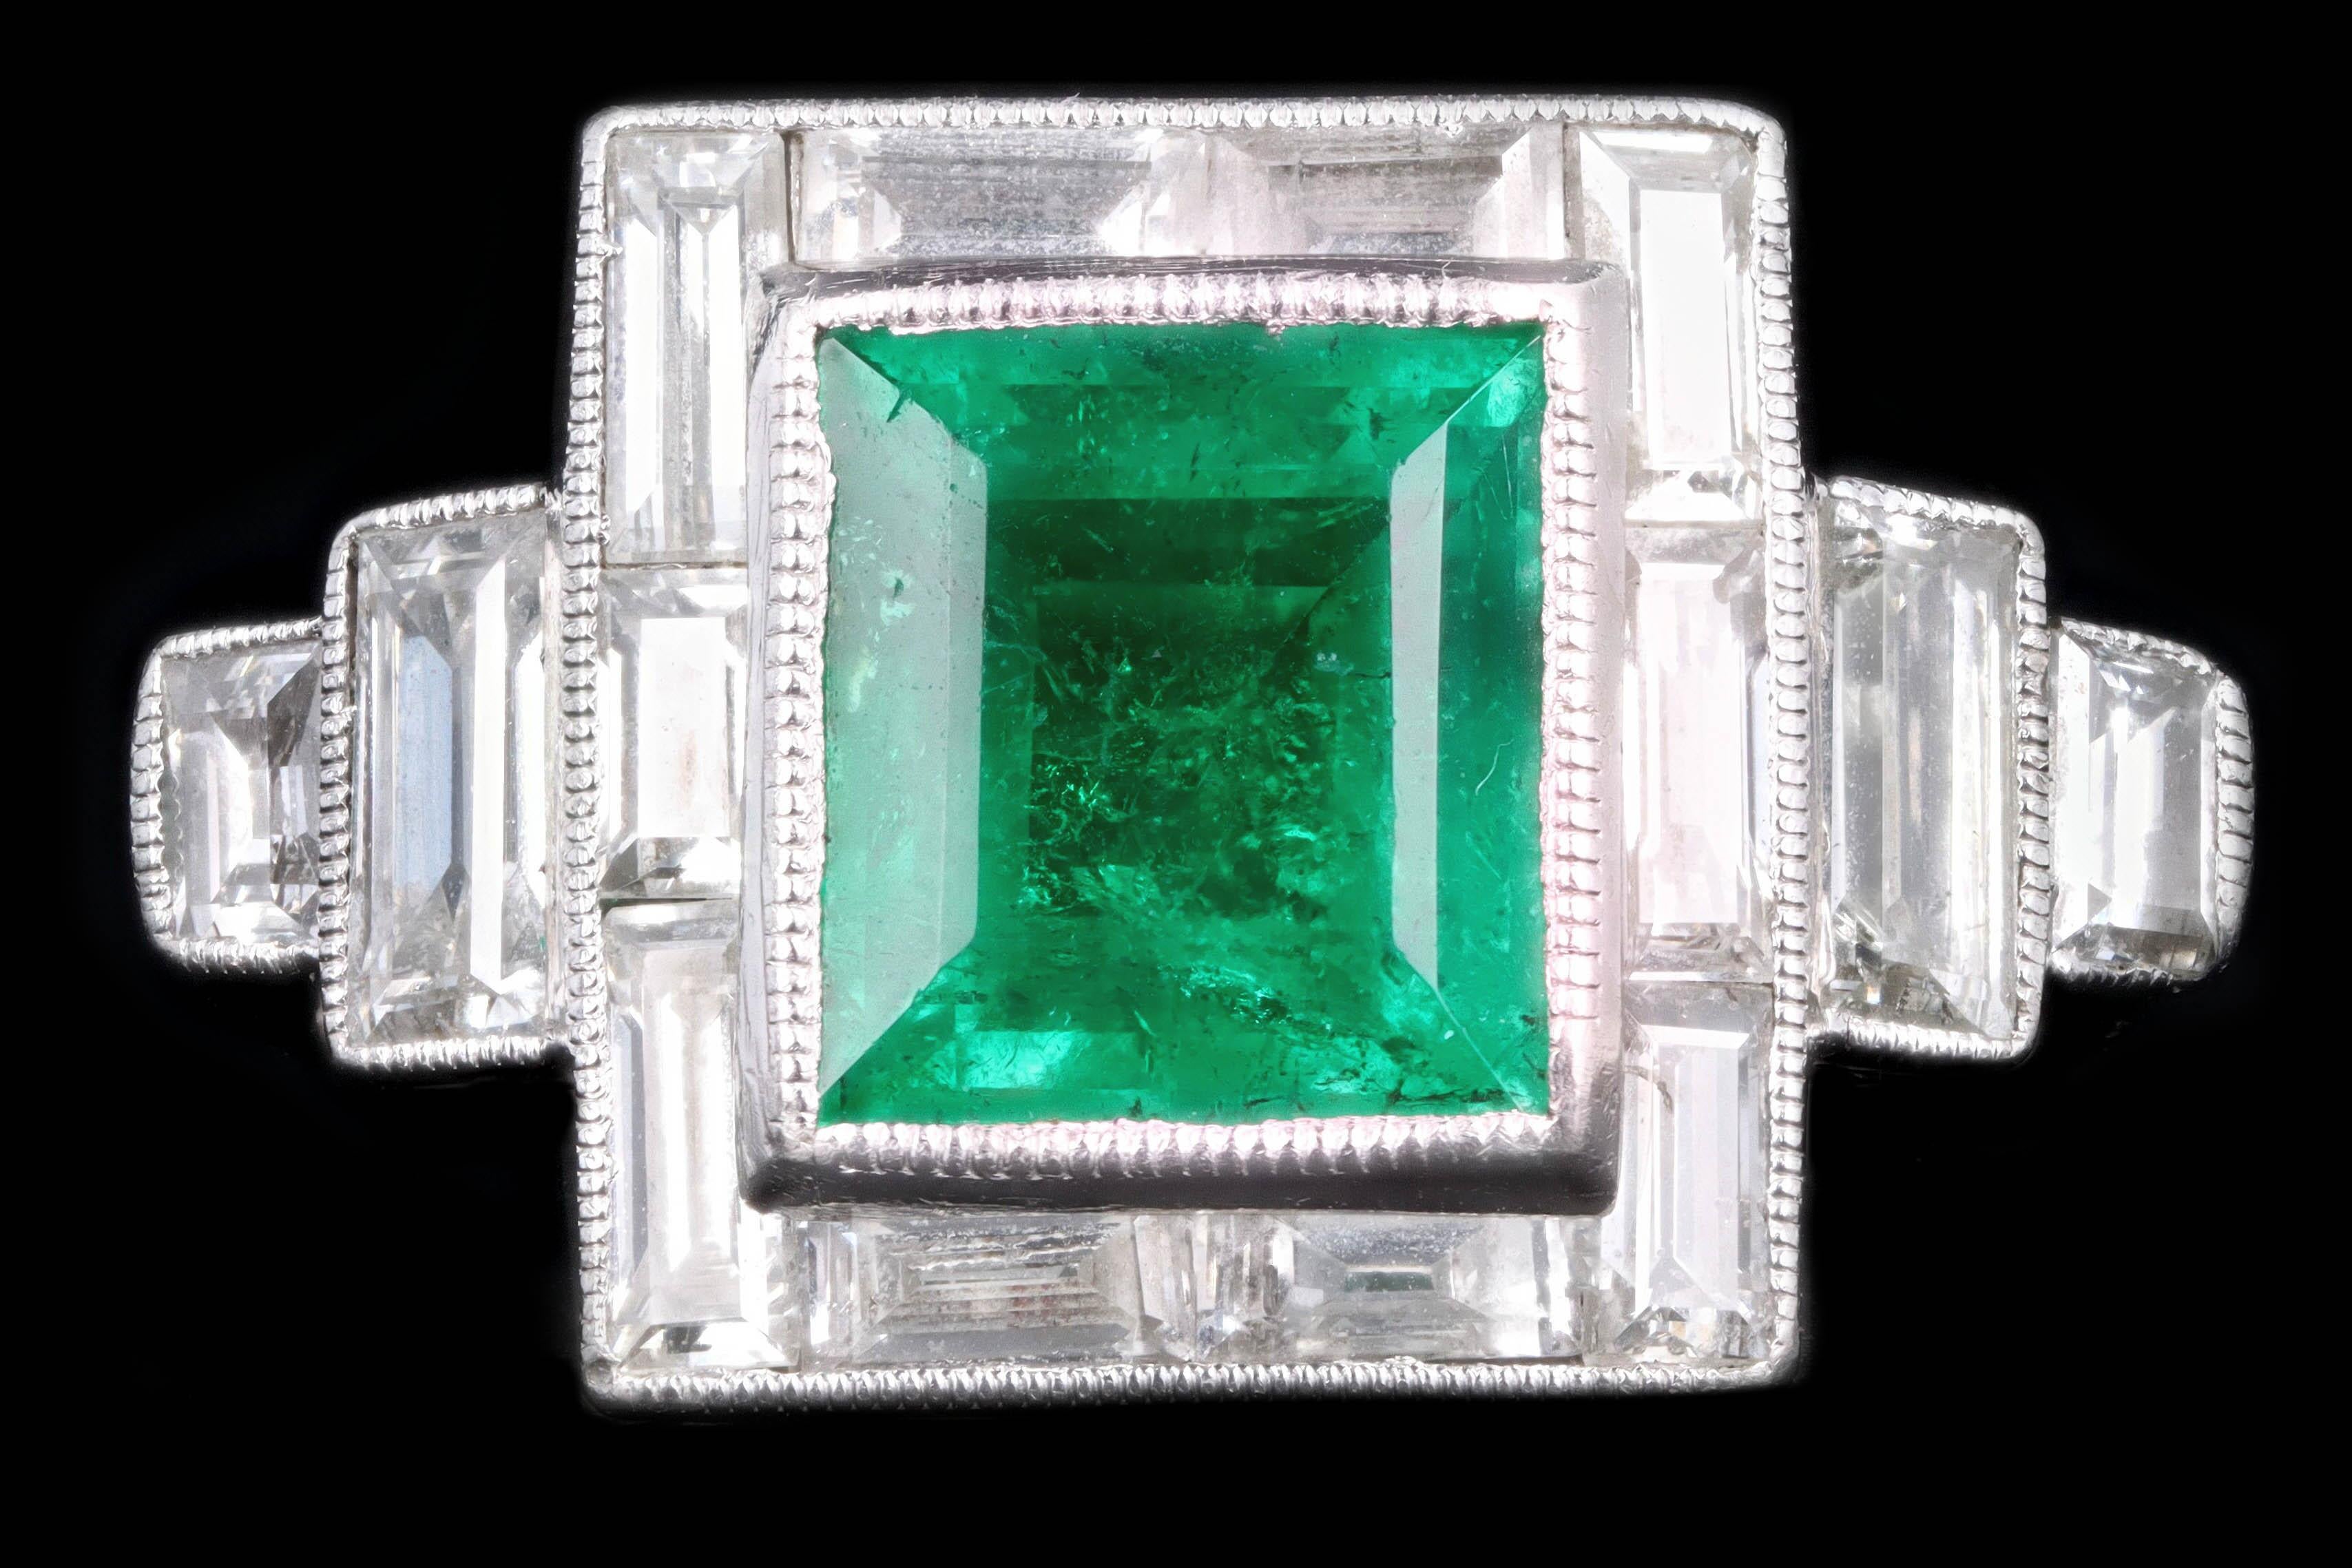 Era: Art Deco

Composition: Platinum 

Primary Stone: Natural Columbian Emerald 

Carat Weight: Approximately 1.80 Carats

Accent Stone: 14 Baguette Cut Diamonds 

Carat Weight: Approximately 1.25 Carats 

Color/ Clarity: F-G / VS1-2

Ring Size: